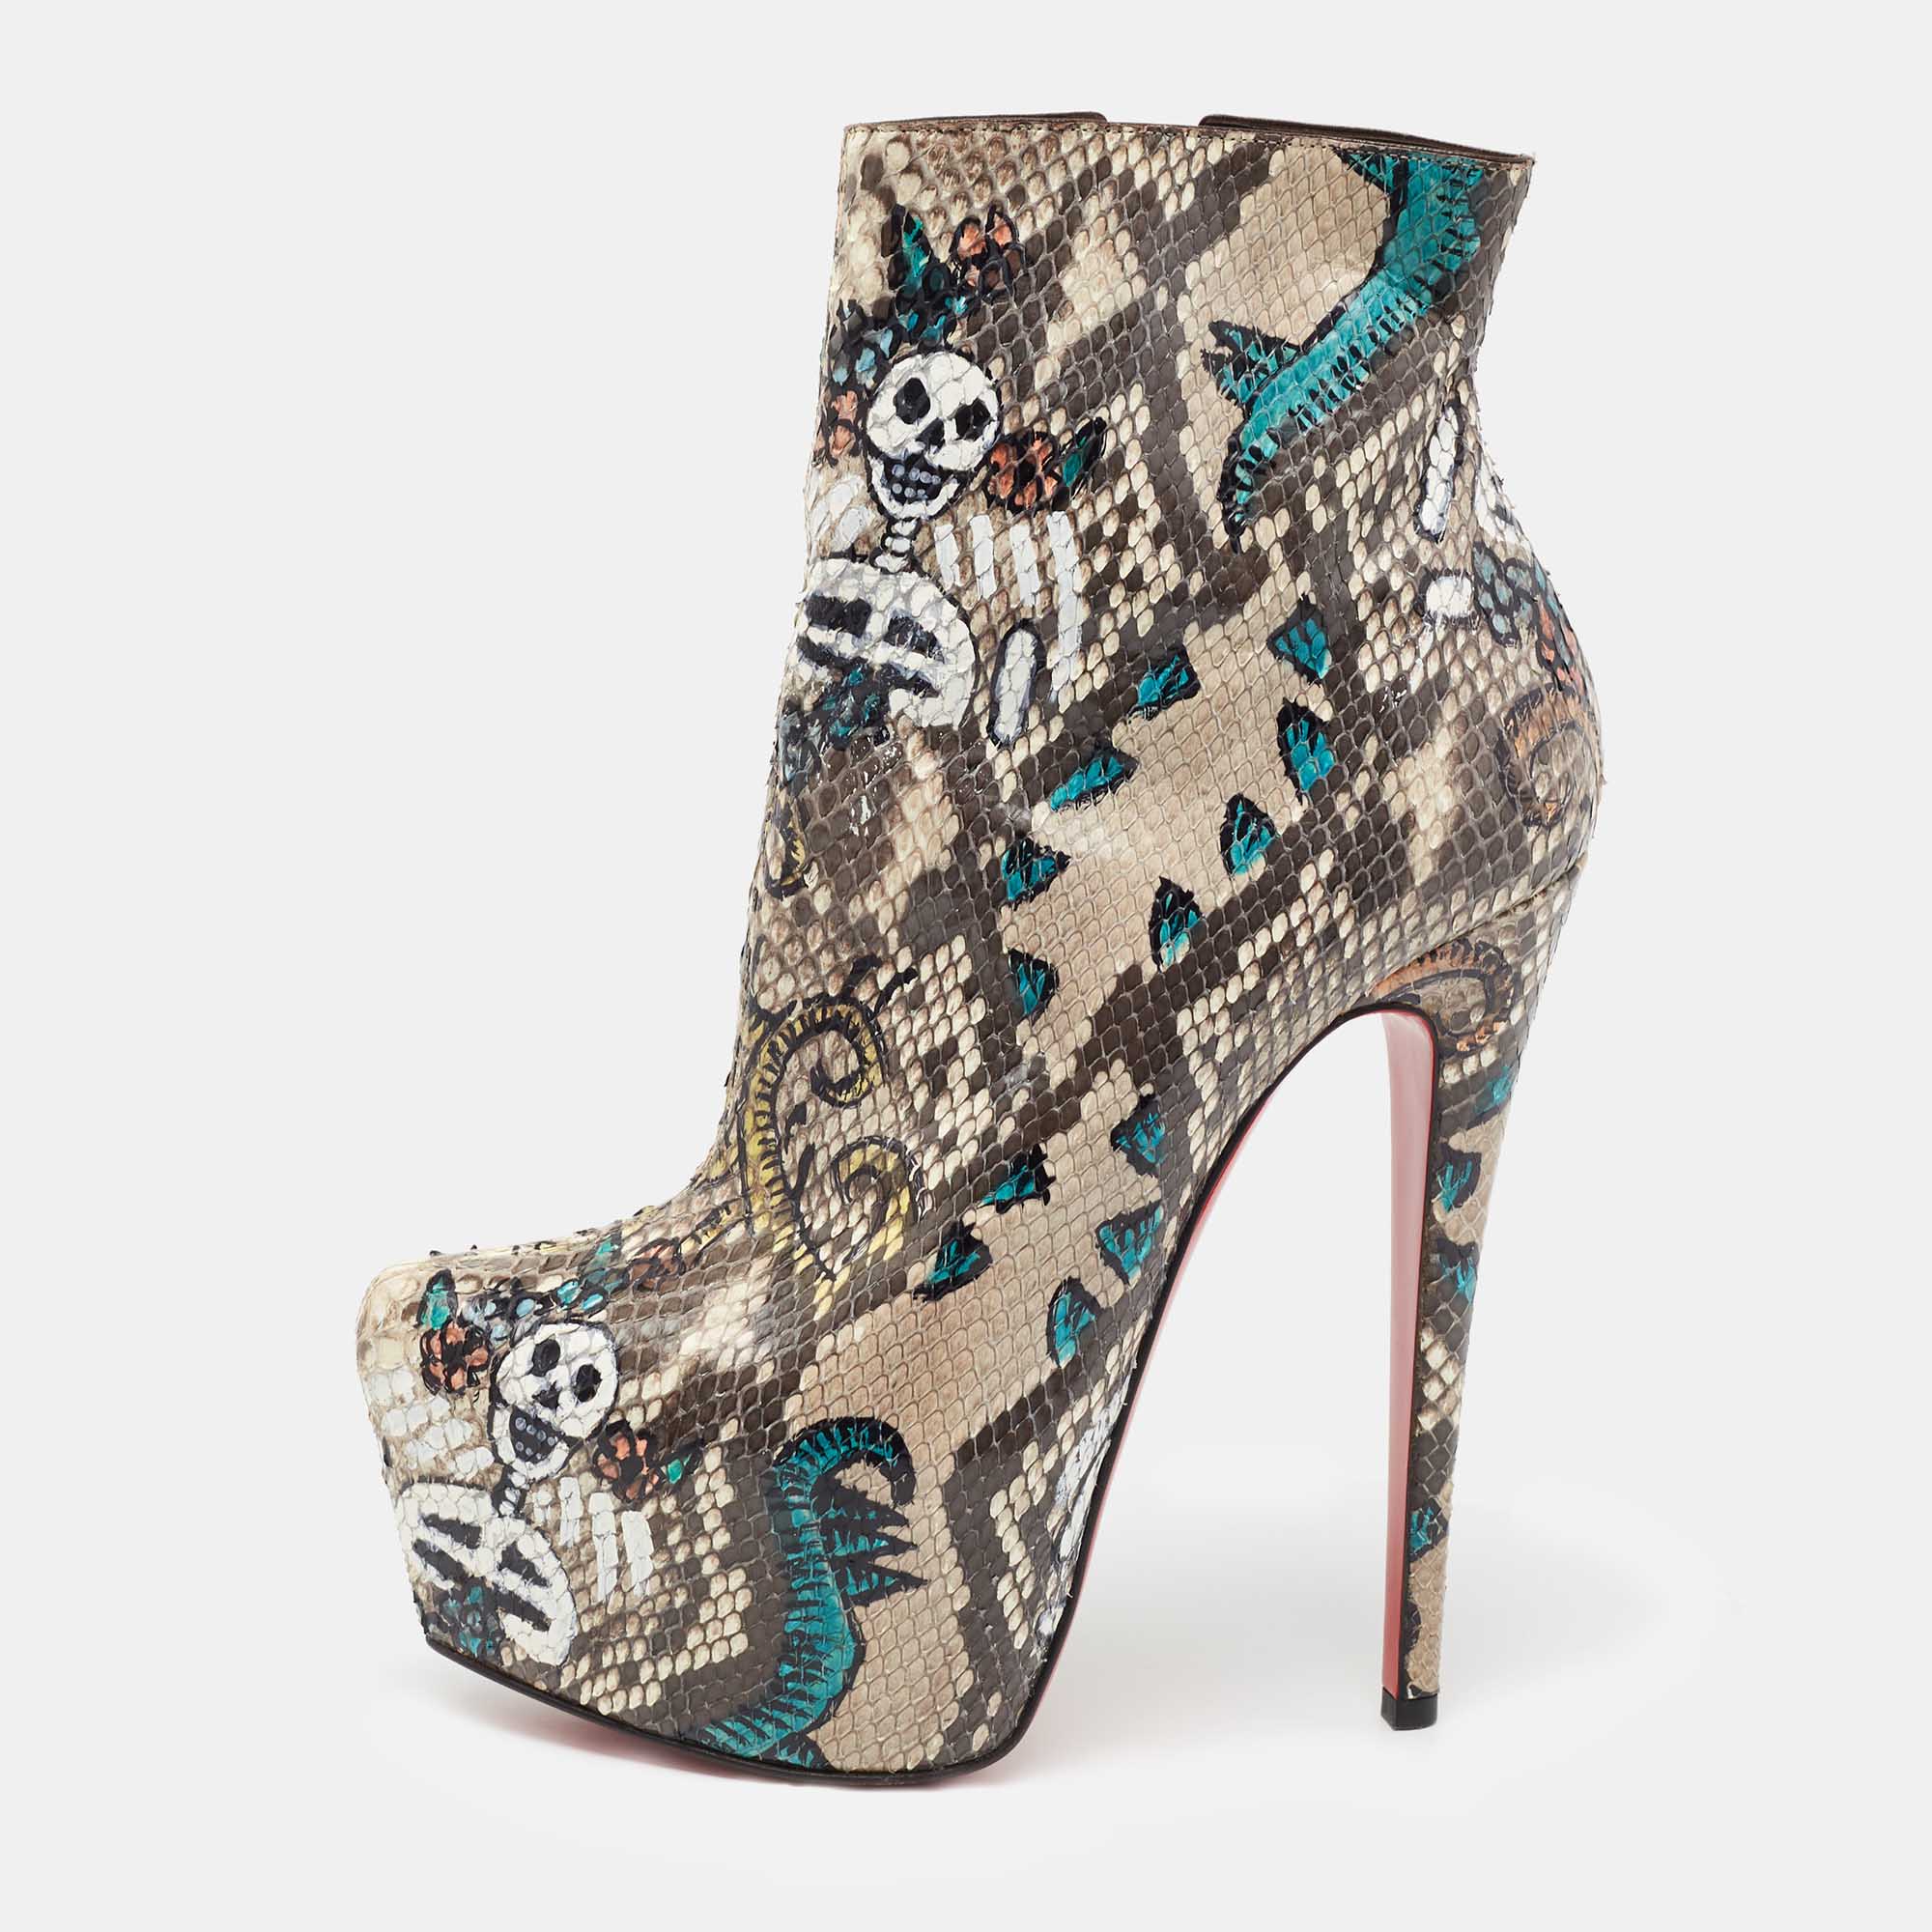 MP Mentor Sæbe Christian Louboutin Multicolor Python Skull Mexico Daf Ankle Boots Size 38 Christian  Louboutin | TLC